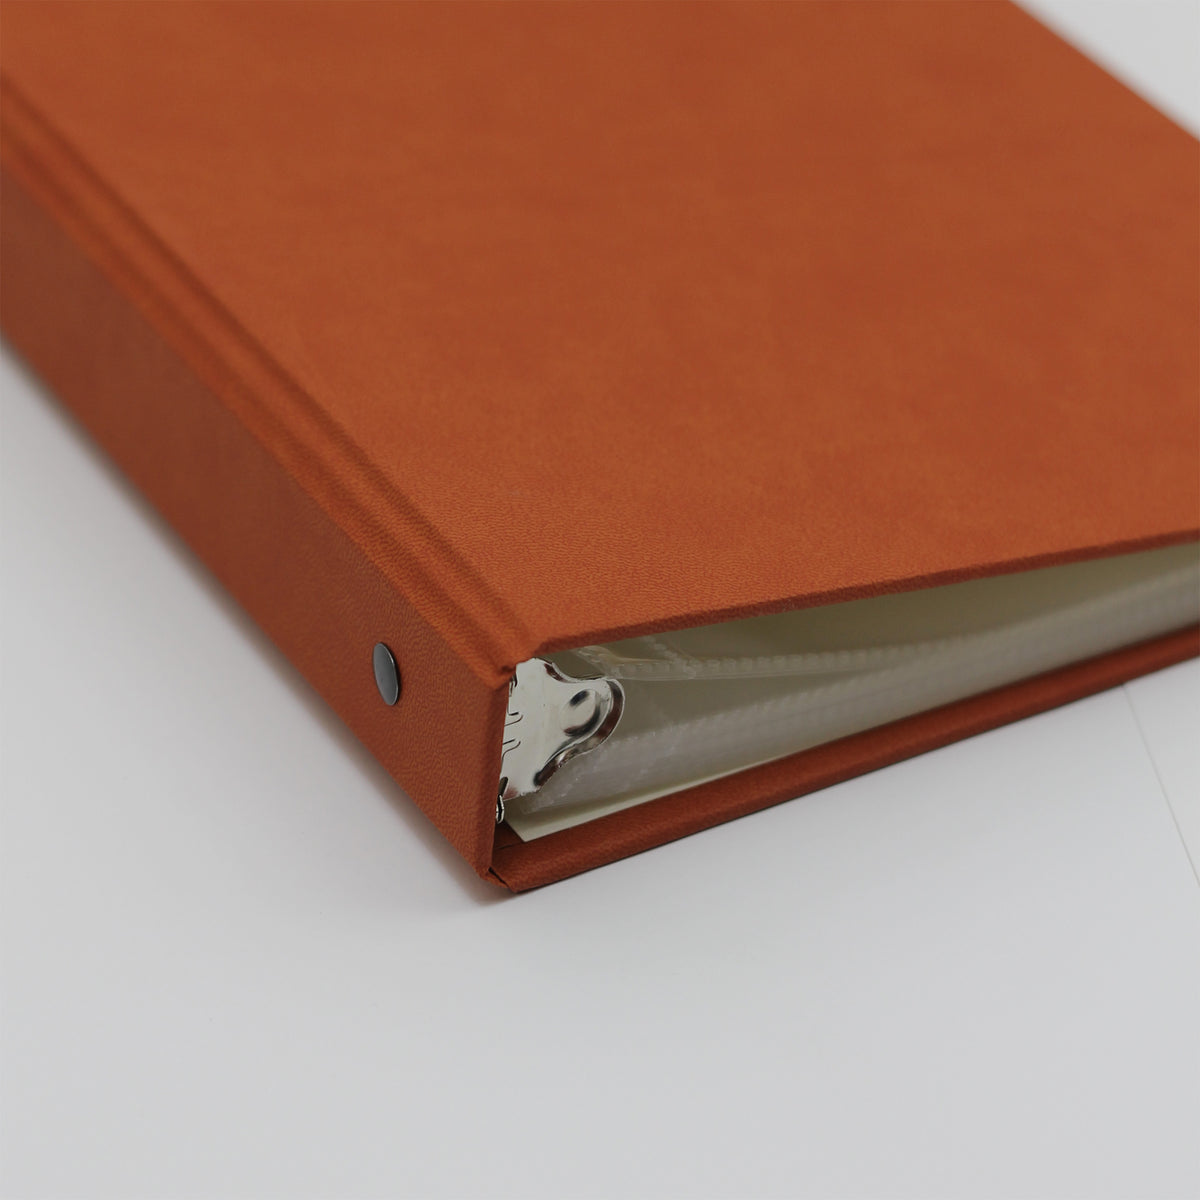 Medium Photo Binder For 4x6 Photos | Cover: Terra Cotta Vegan Leather | Available Personalized